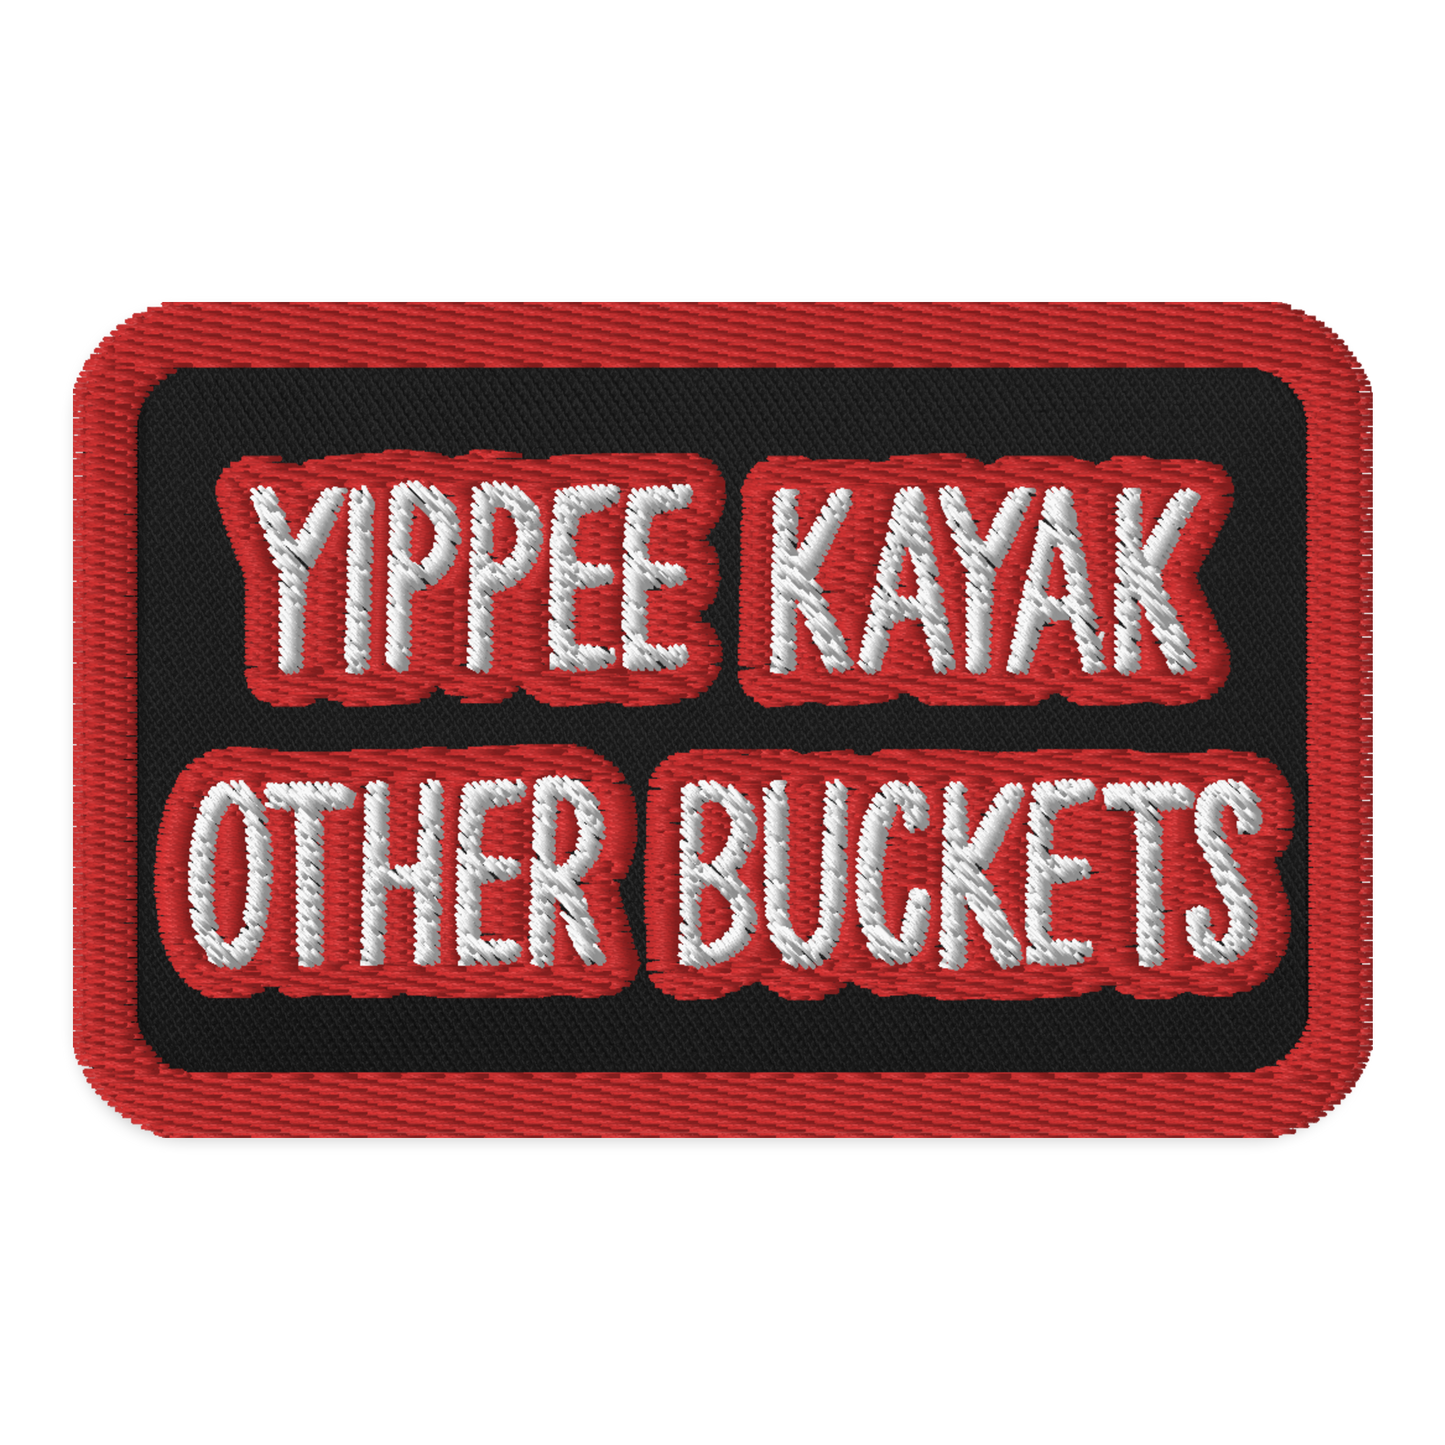 Yippee Kayak Other Buckets Embroidered patch